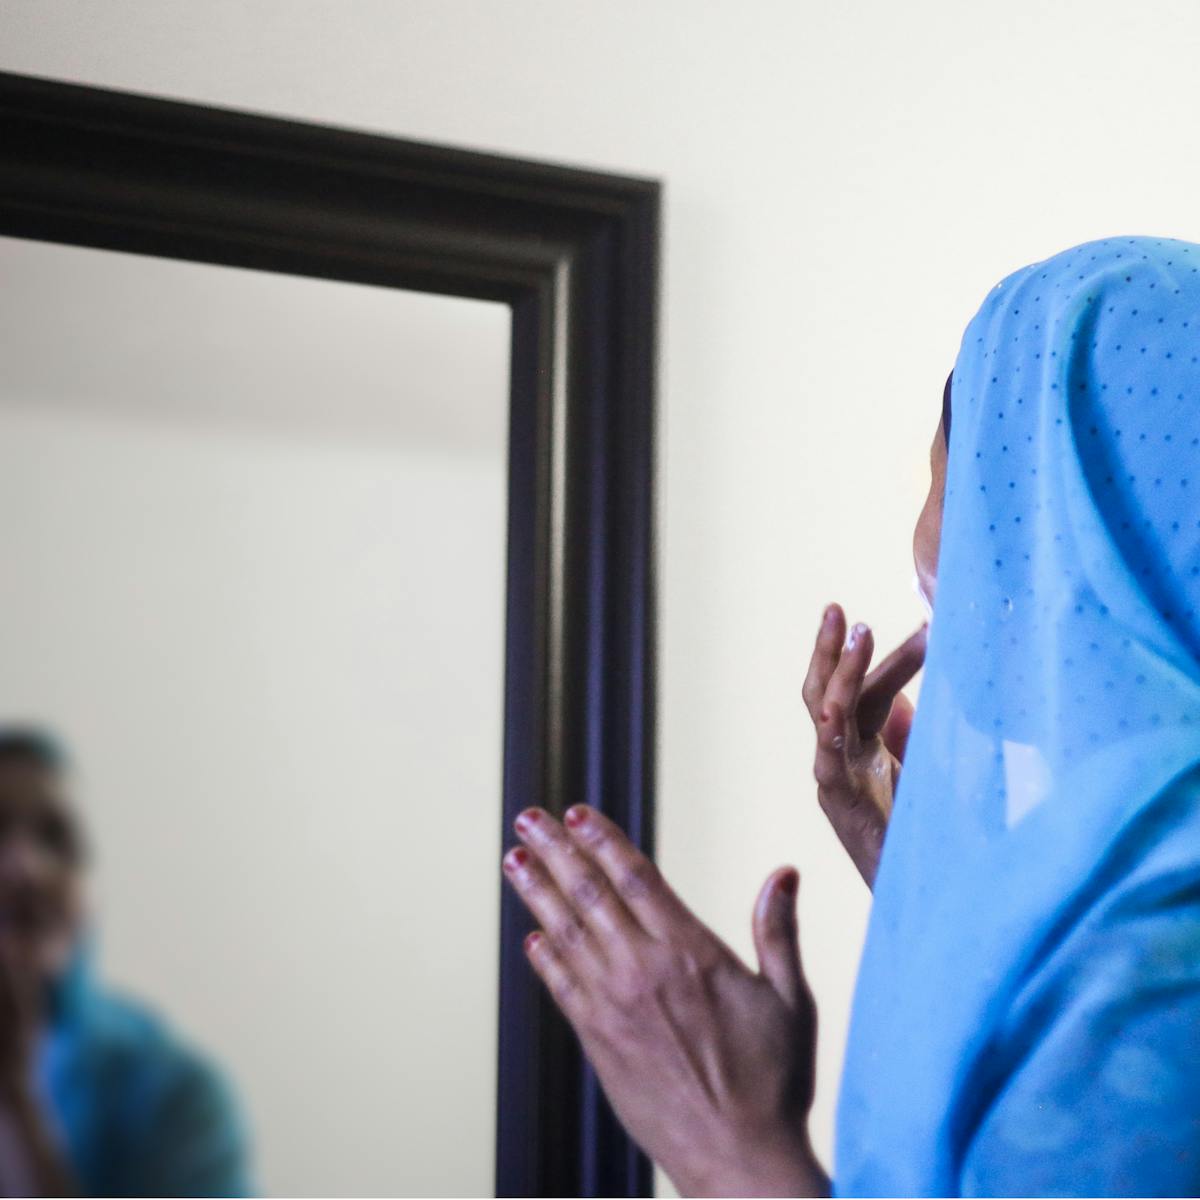 Photograph of the back of a woman's head and shoulders as she applies face cream in front of a wall mirror. In the reflection you can see her face, out of focus.